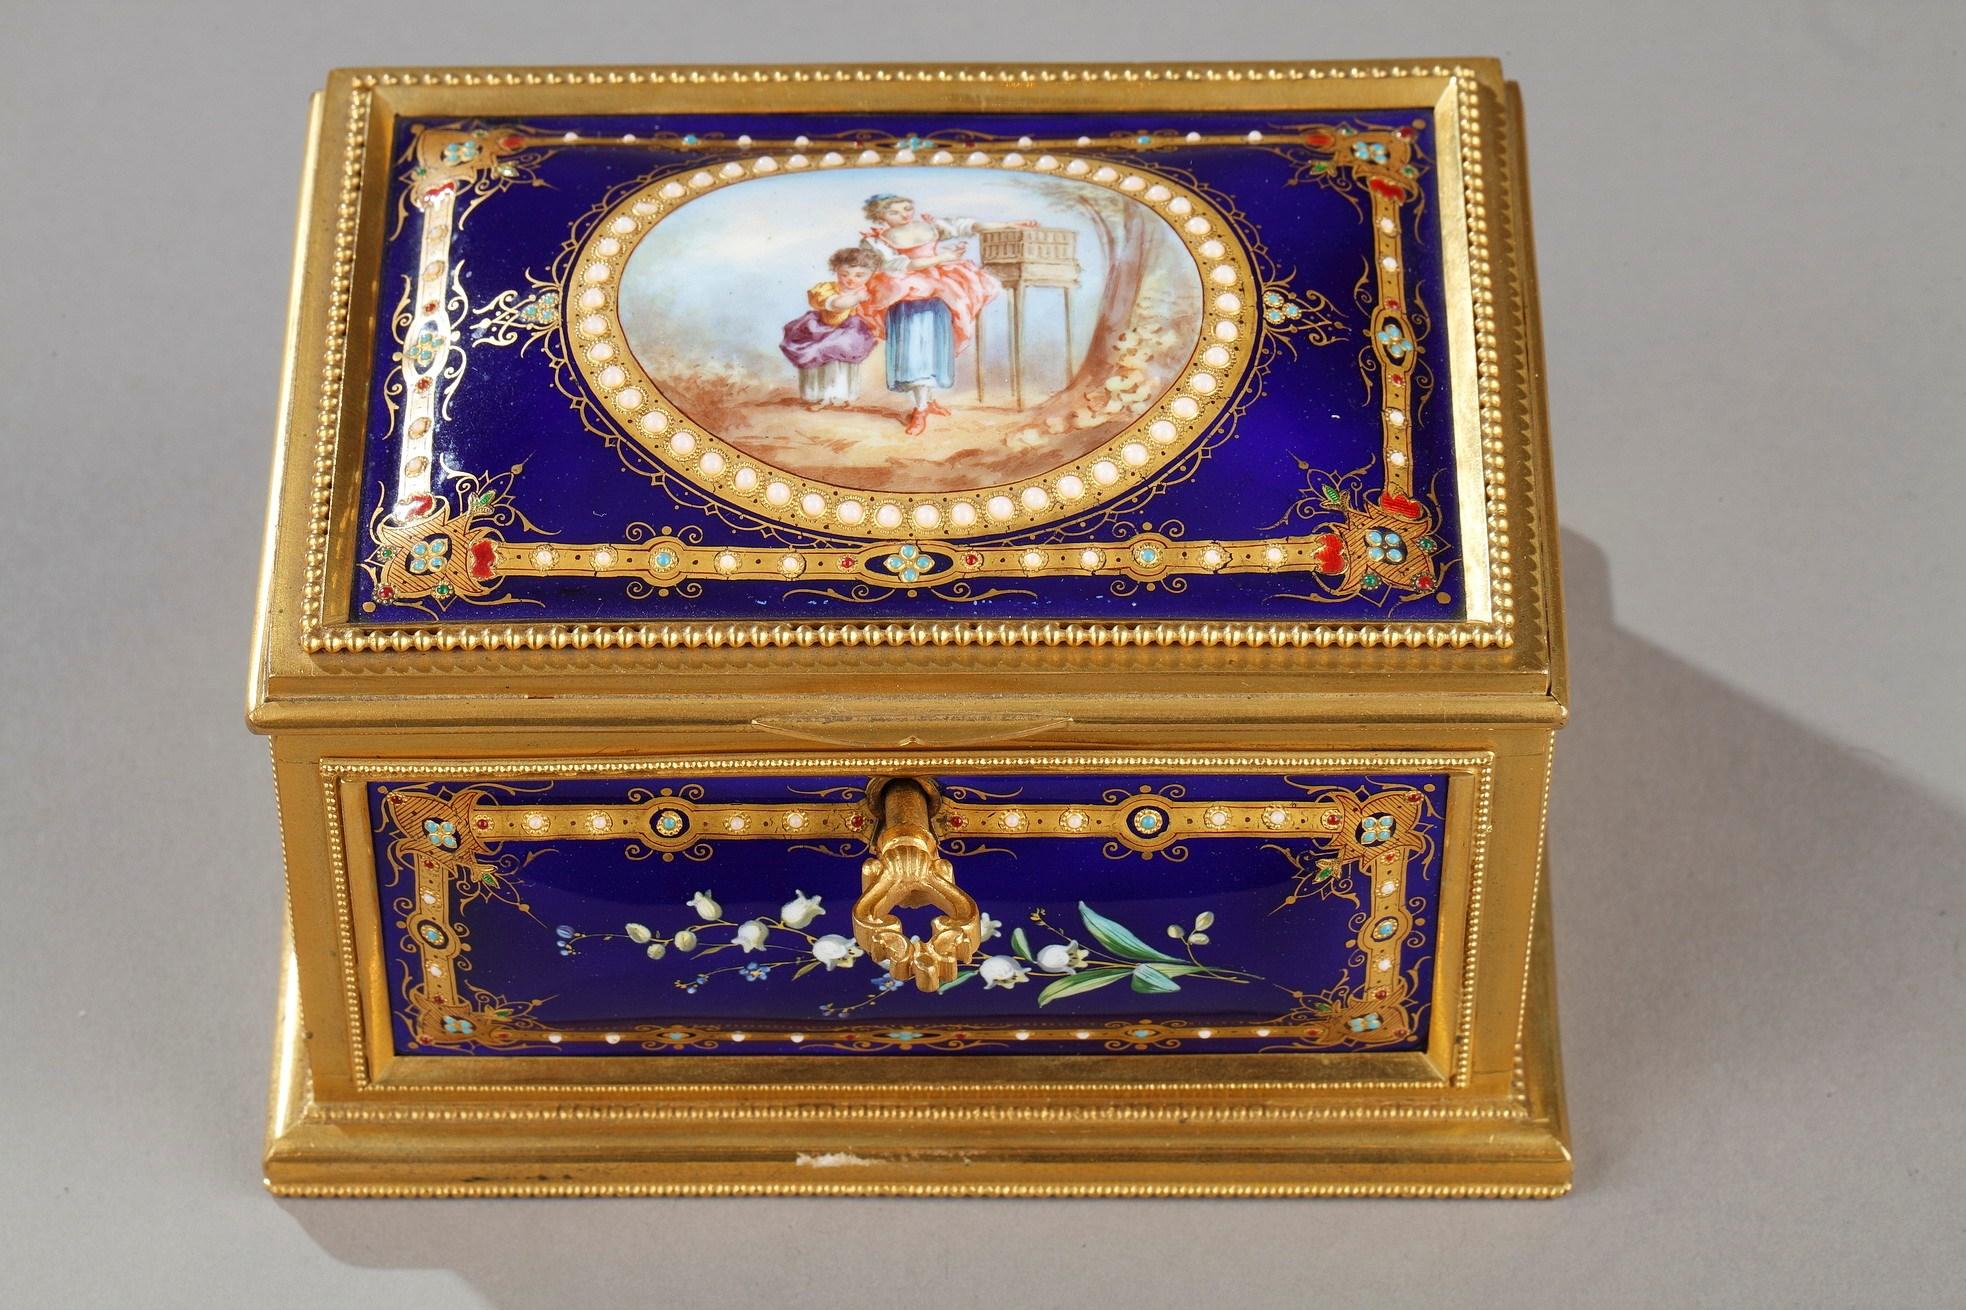 A small rectangular casket in enamel and gilt bronze decorated with pearl garland motifs and set with five enameled plates. The lid is decorated with a blue enameled plate with a medallion in the center depicting two young girls in 18th century